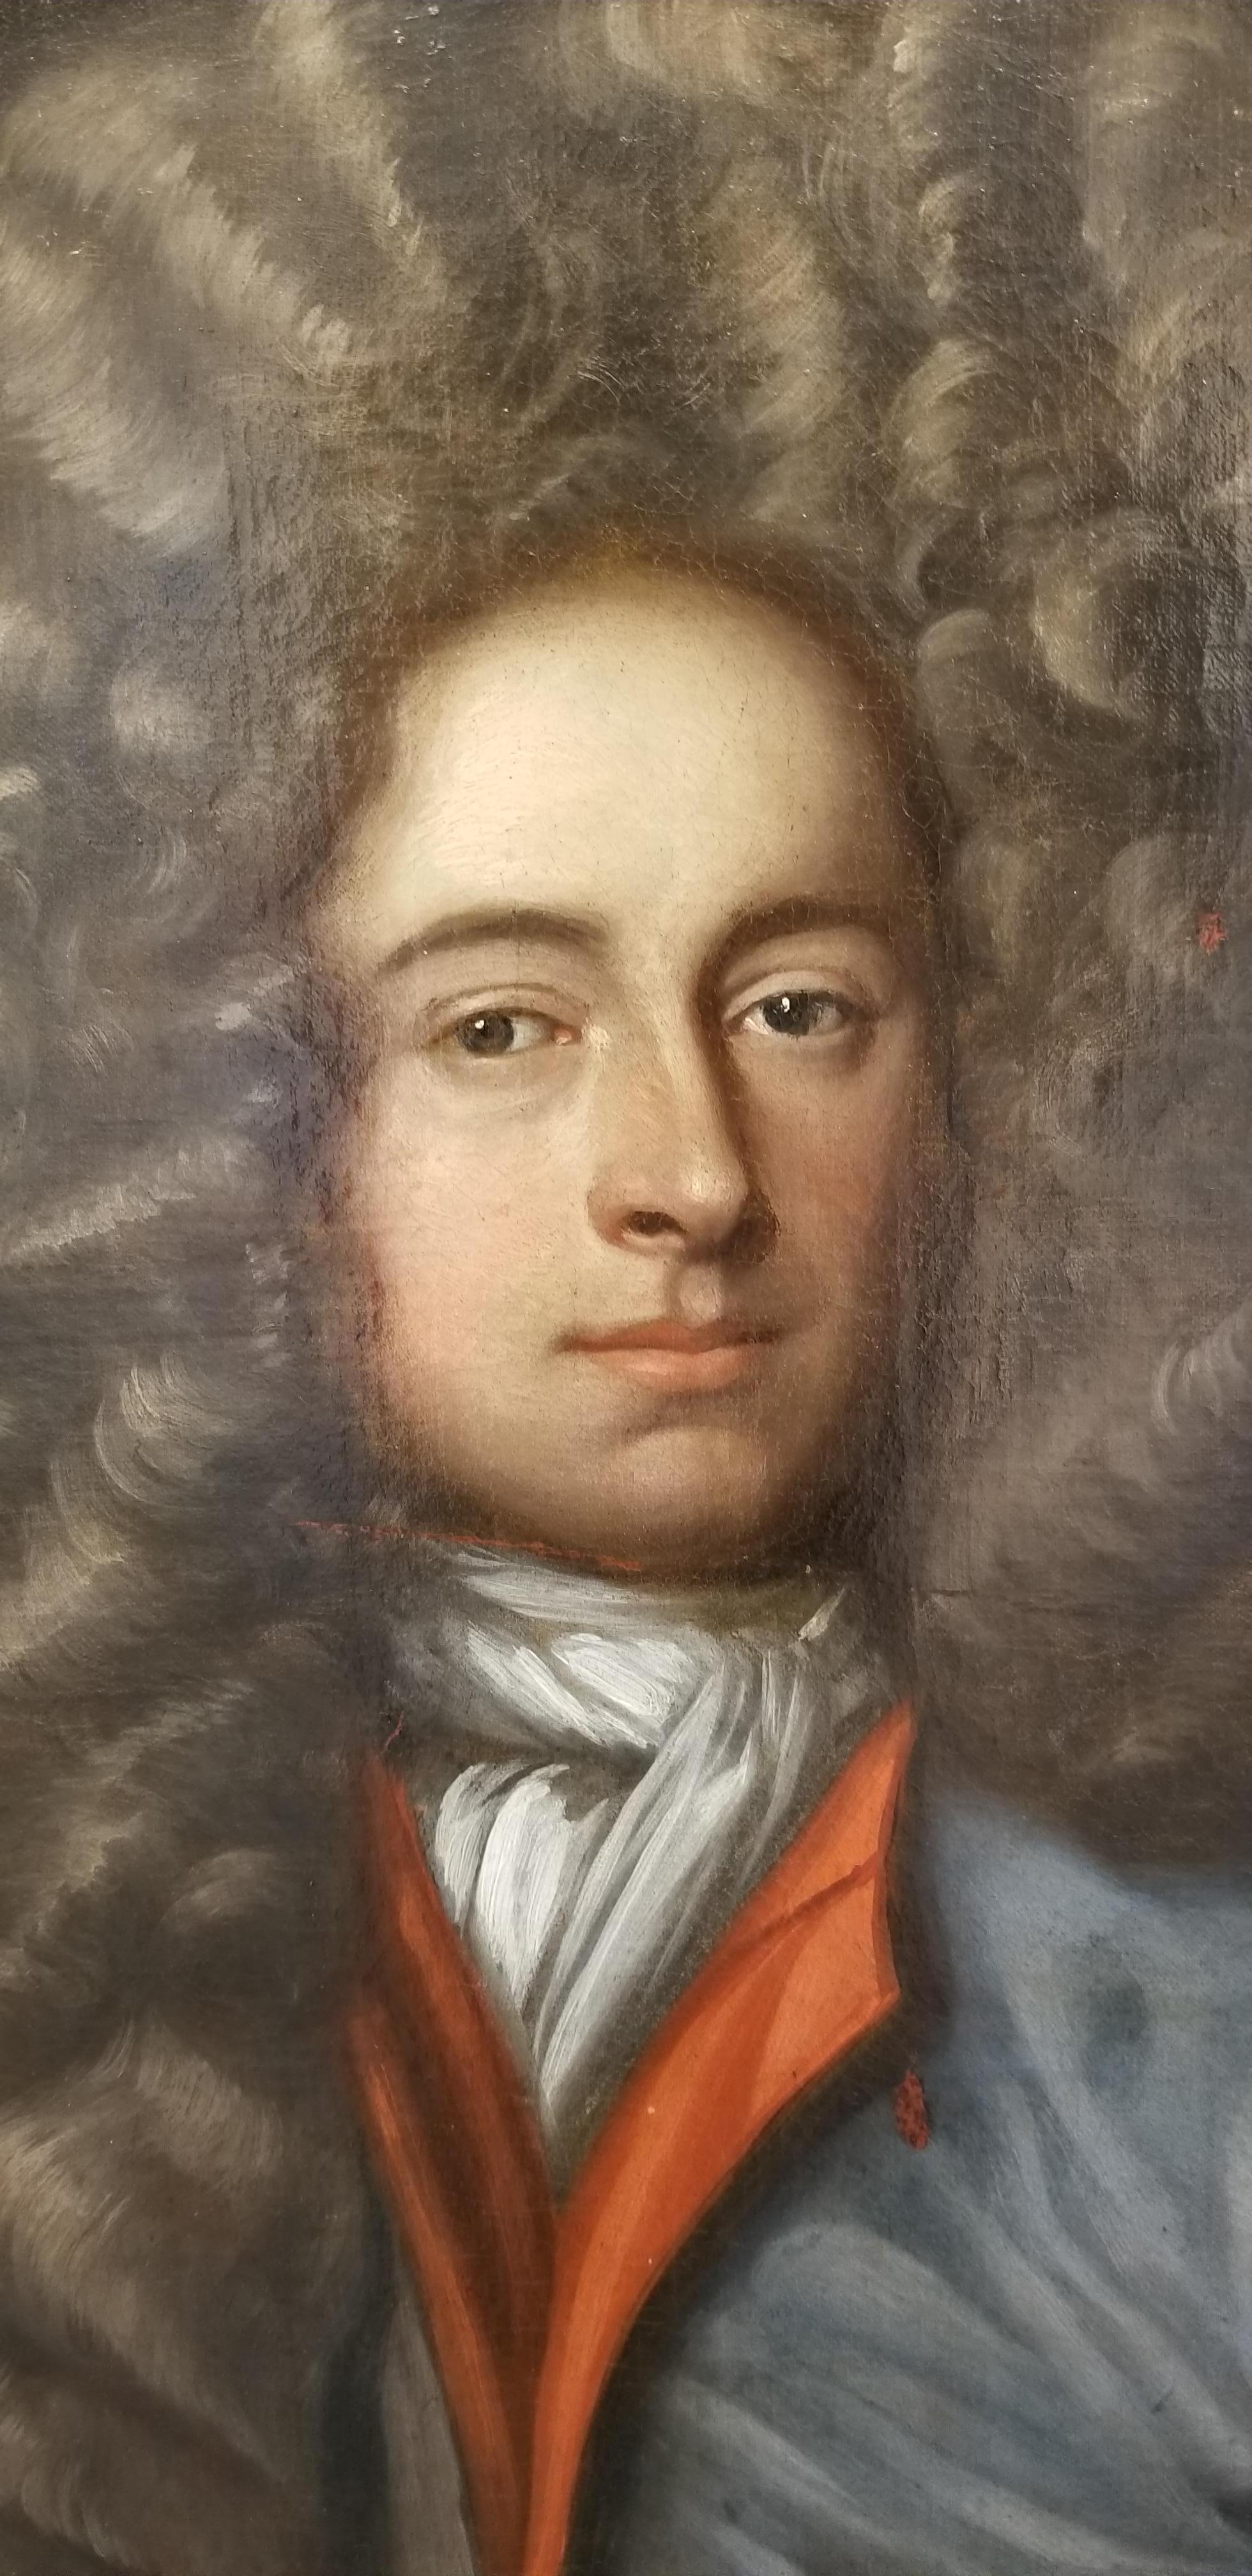 A fine 18th century oval portrait painting of a European nobleman in a period frame. John Linn label on frame, antique dealers and restorers located in Scarborough, England from 1905-1925. Pencil on verso of canvas 